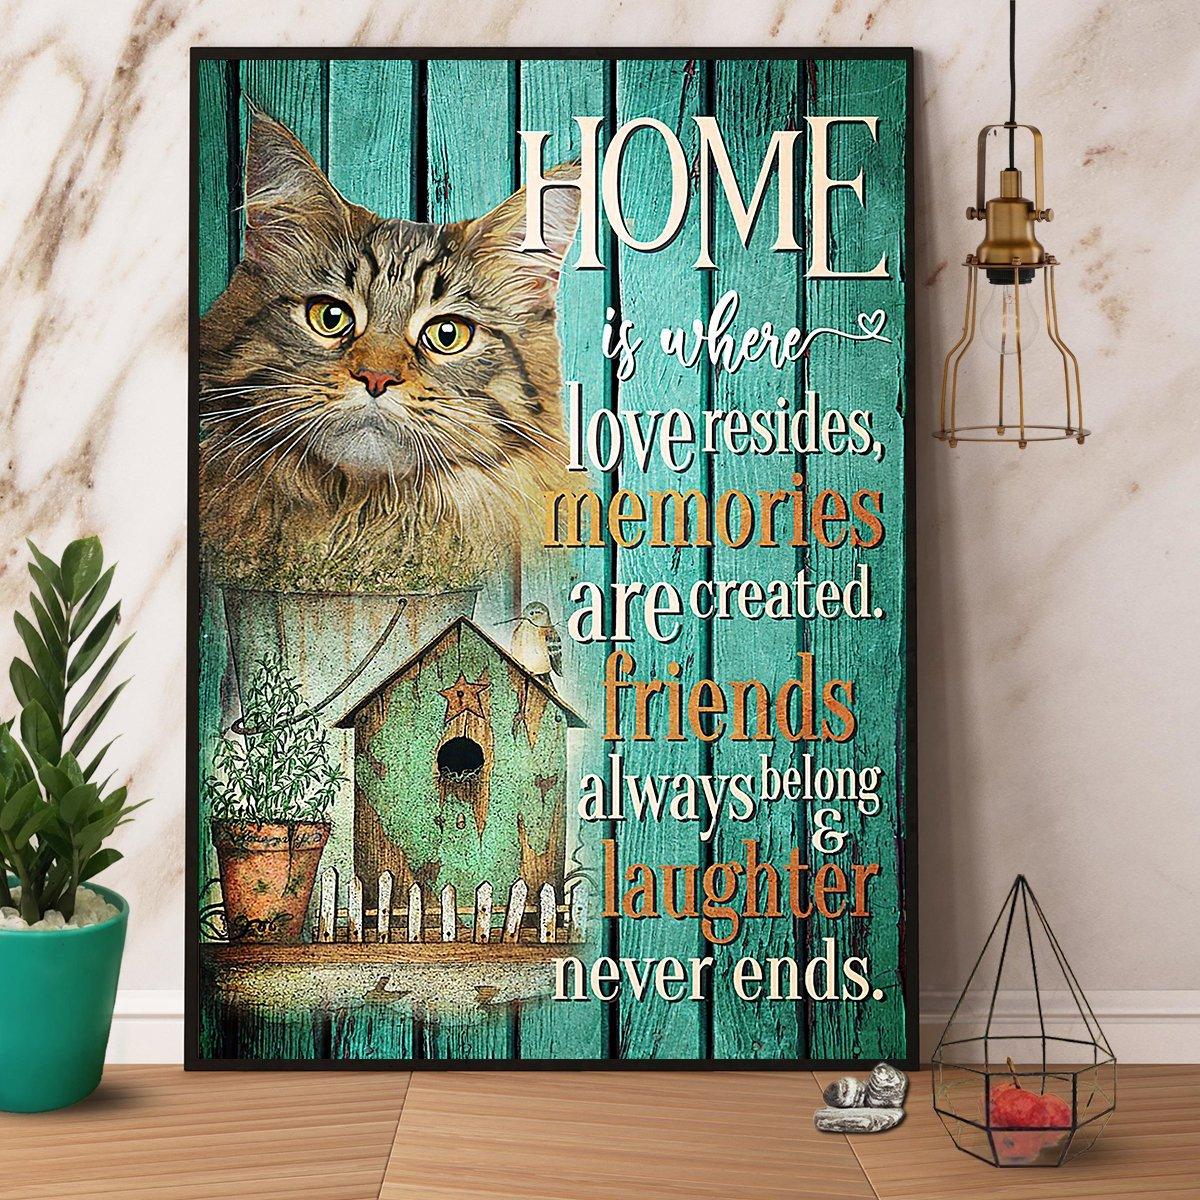 Maine Coon Cat Portrait Canvas For Son - Home Is Where Love Resides Memories Are Created Canvas, Perfect Gift For Maine Coon Lover, Cat Lover - Amzanimalsgift